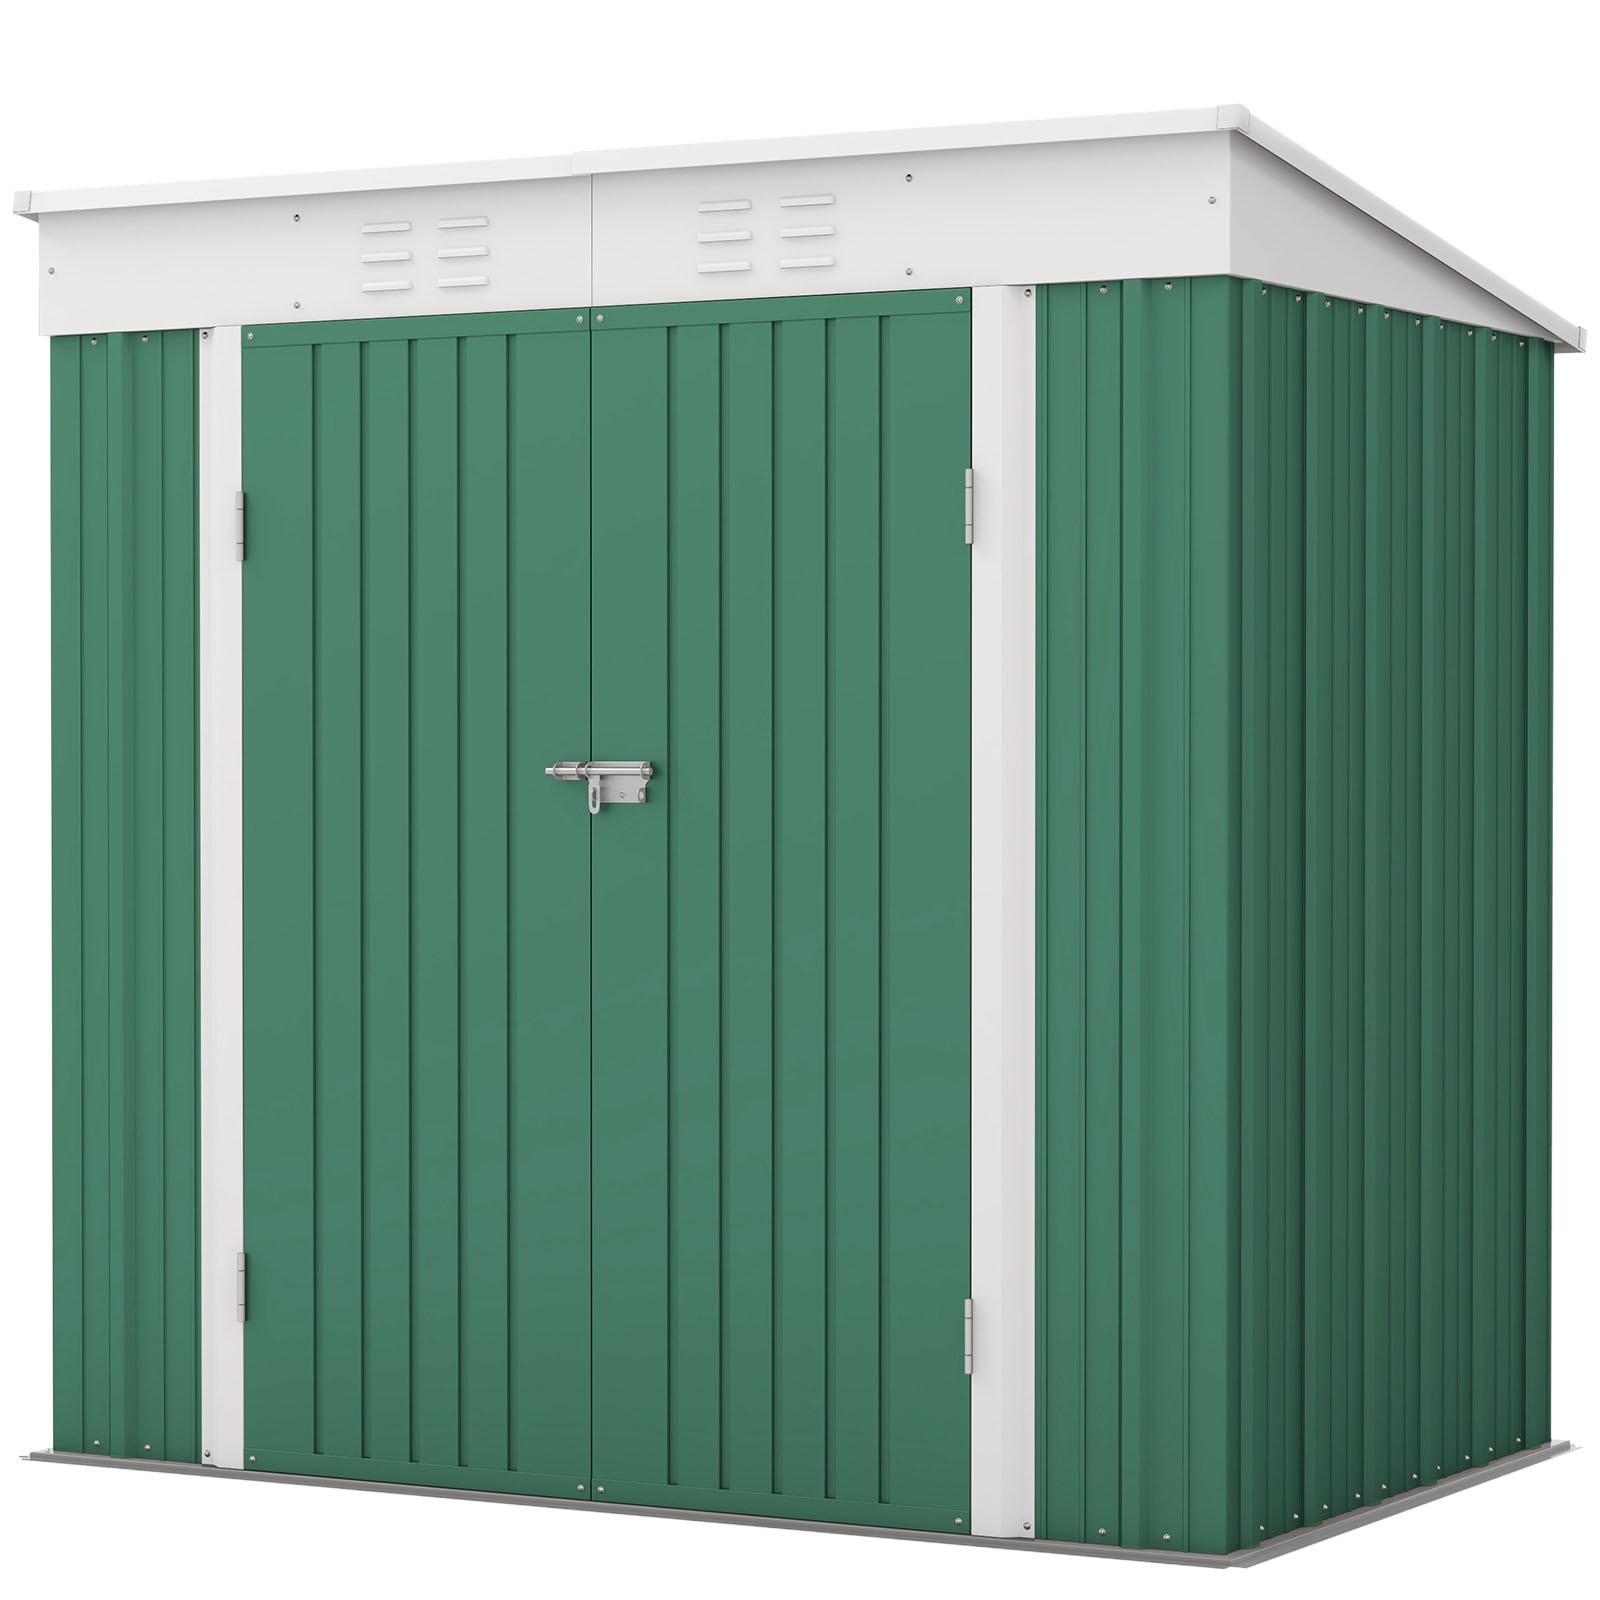 Patiowell 6-ft x 4-ft Galvanized Steel Storage Shed in Green | WES-PS23-0230A-9